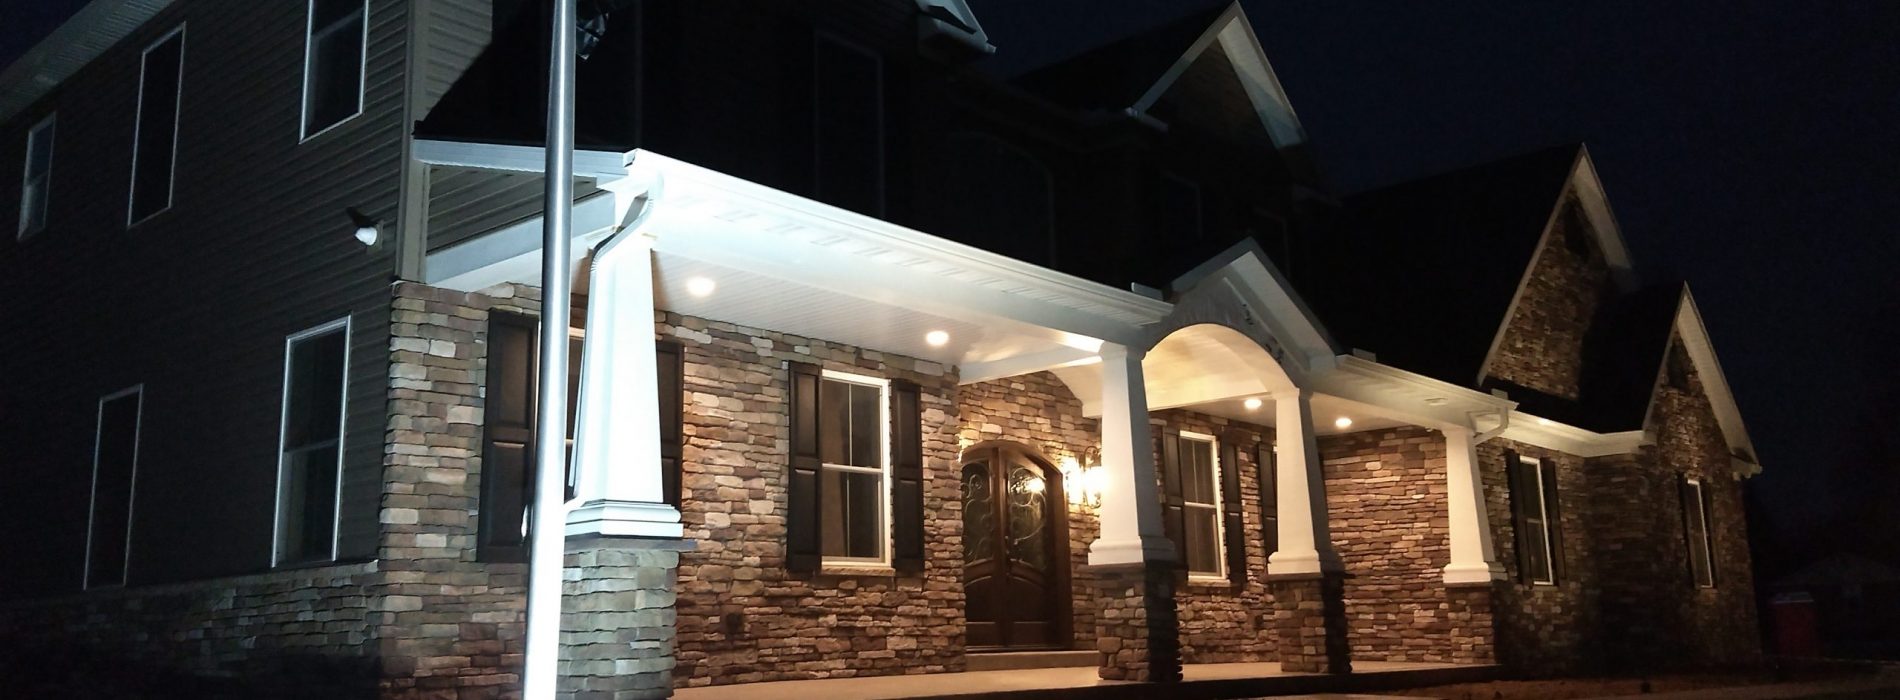 night time view of the grey and maroon house front porch